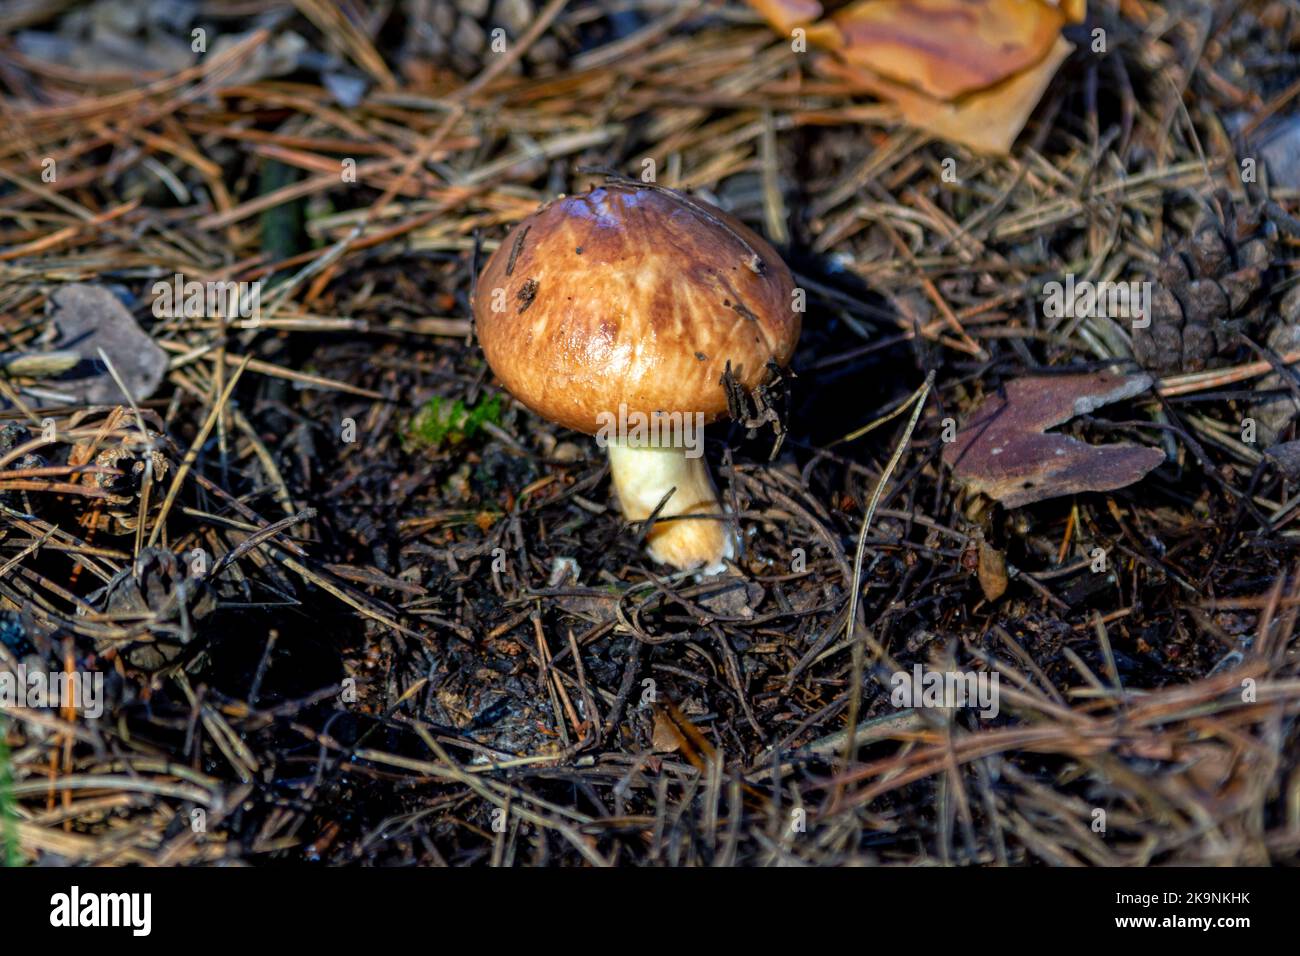 Honey mushroom with brown hat growing in a forest Stock Photo